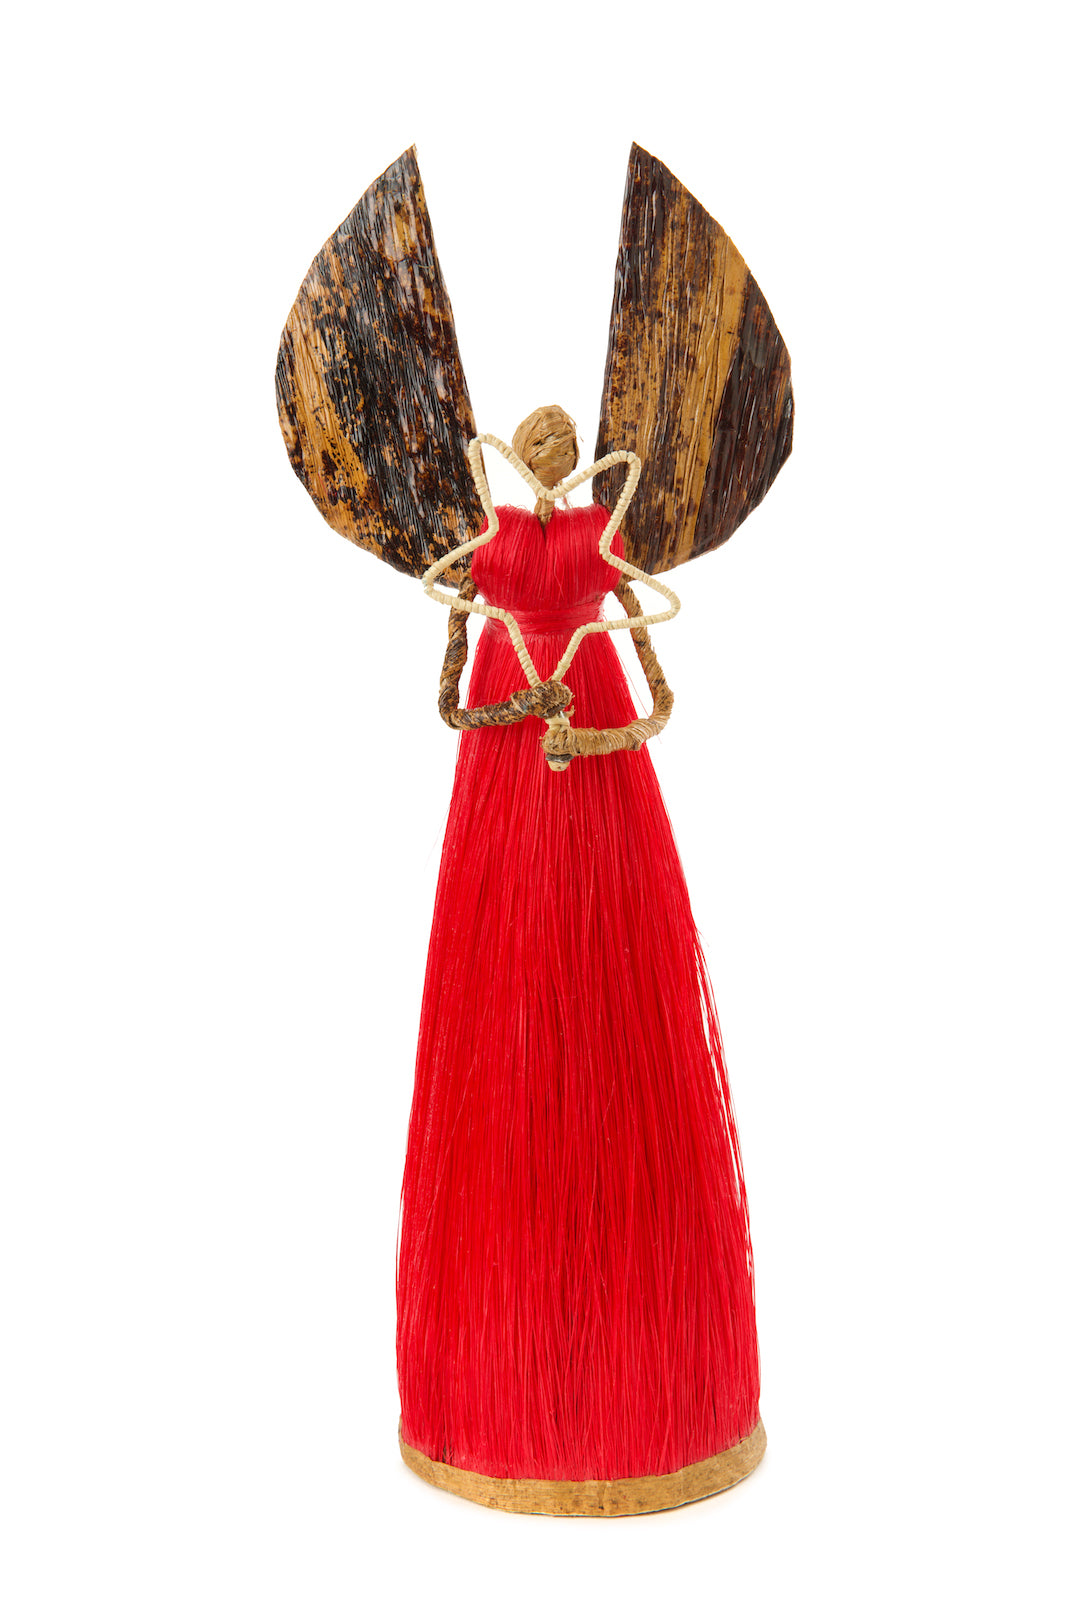 10" Red Sisal Angel of Light Holiday Sculpture